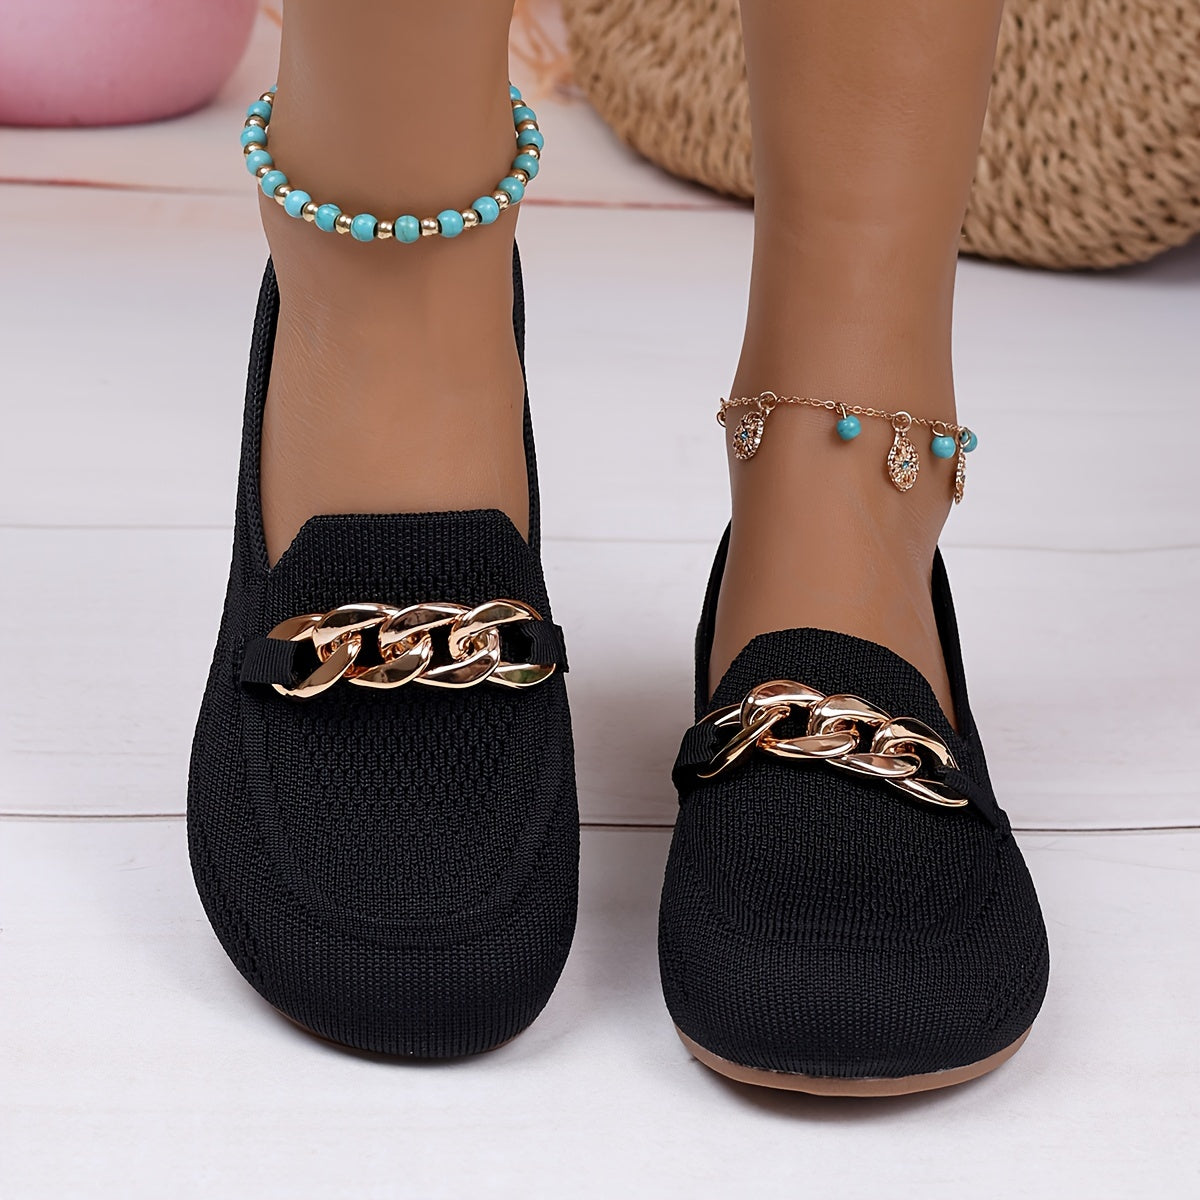 Women's Solid Color Knitted Flats, Metallic Chain Decor Soft Sole Walking Shoes, Breathable Daily Footwear